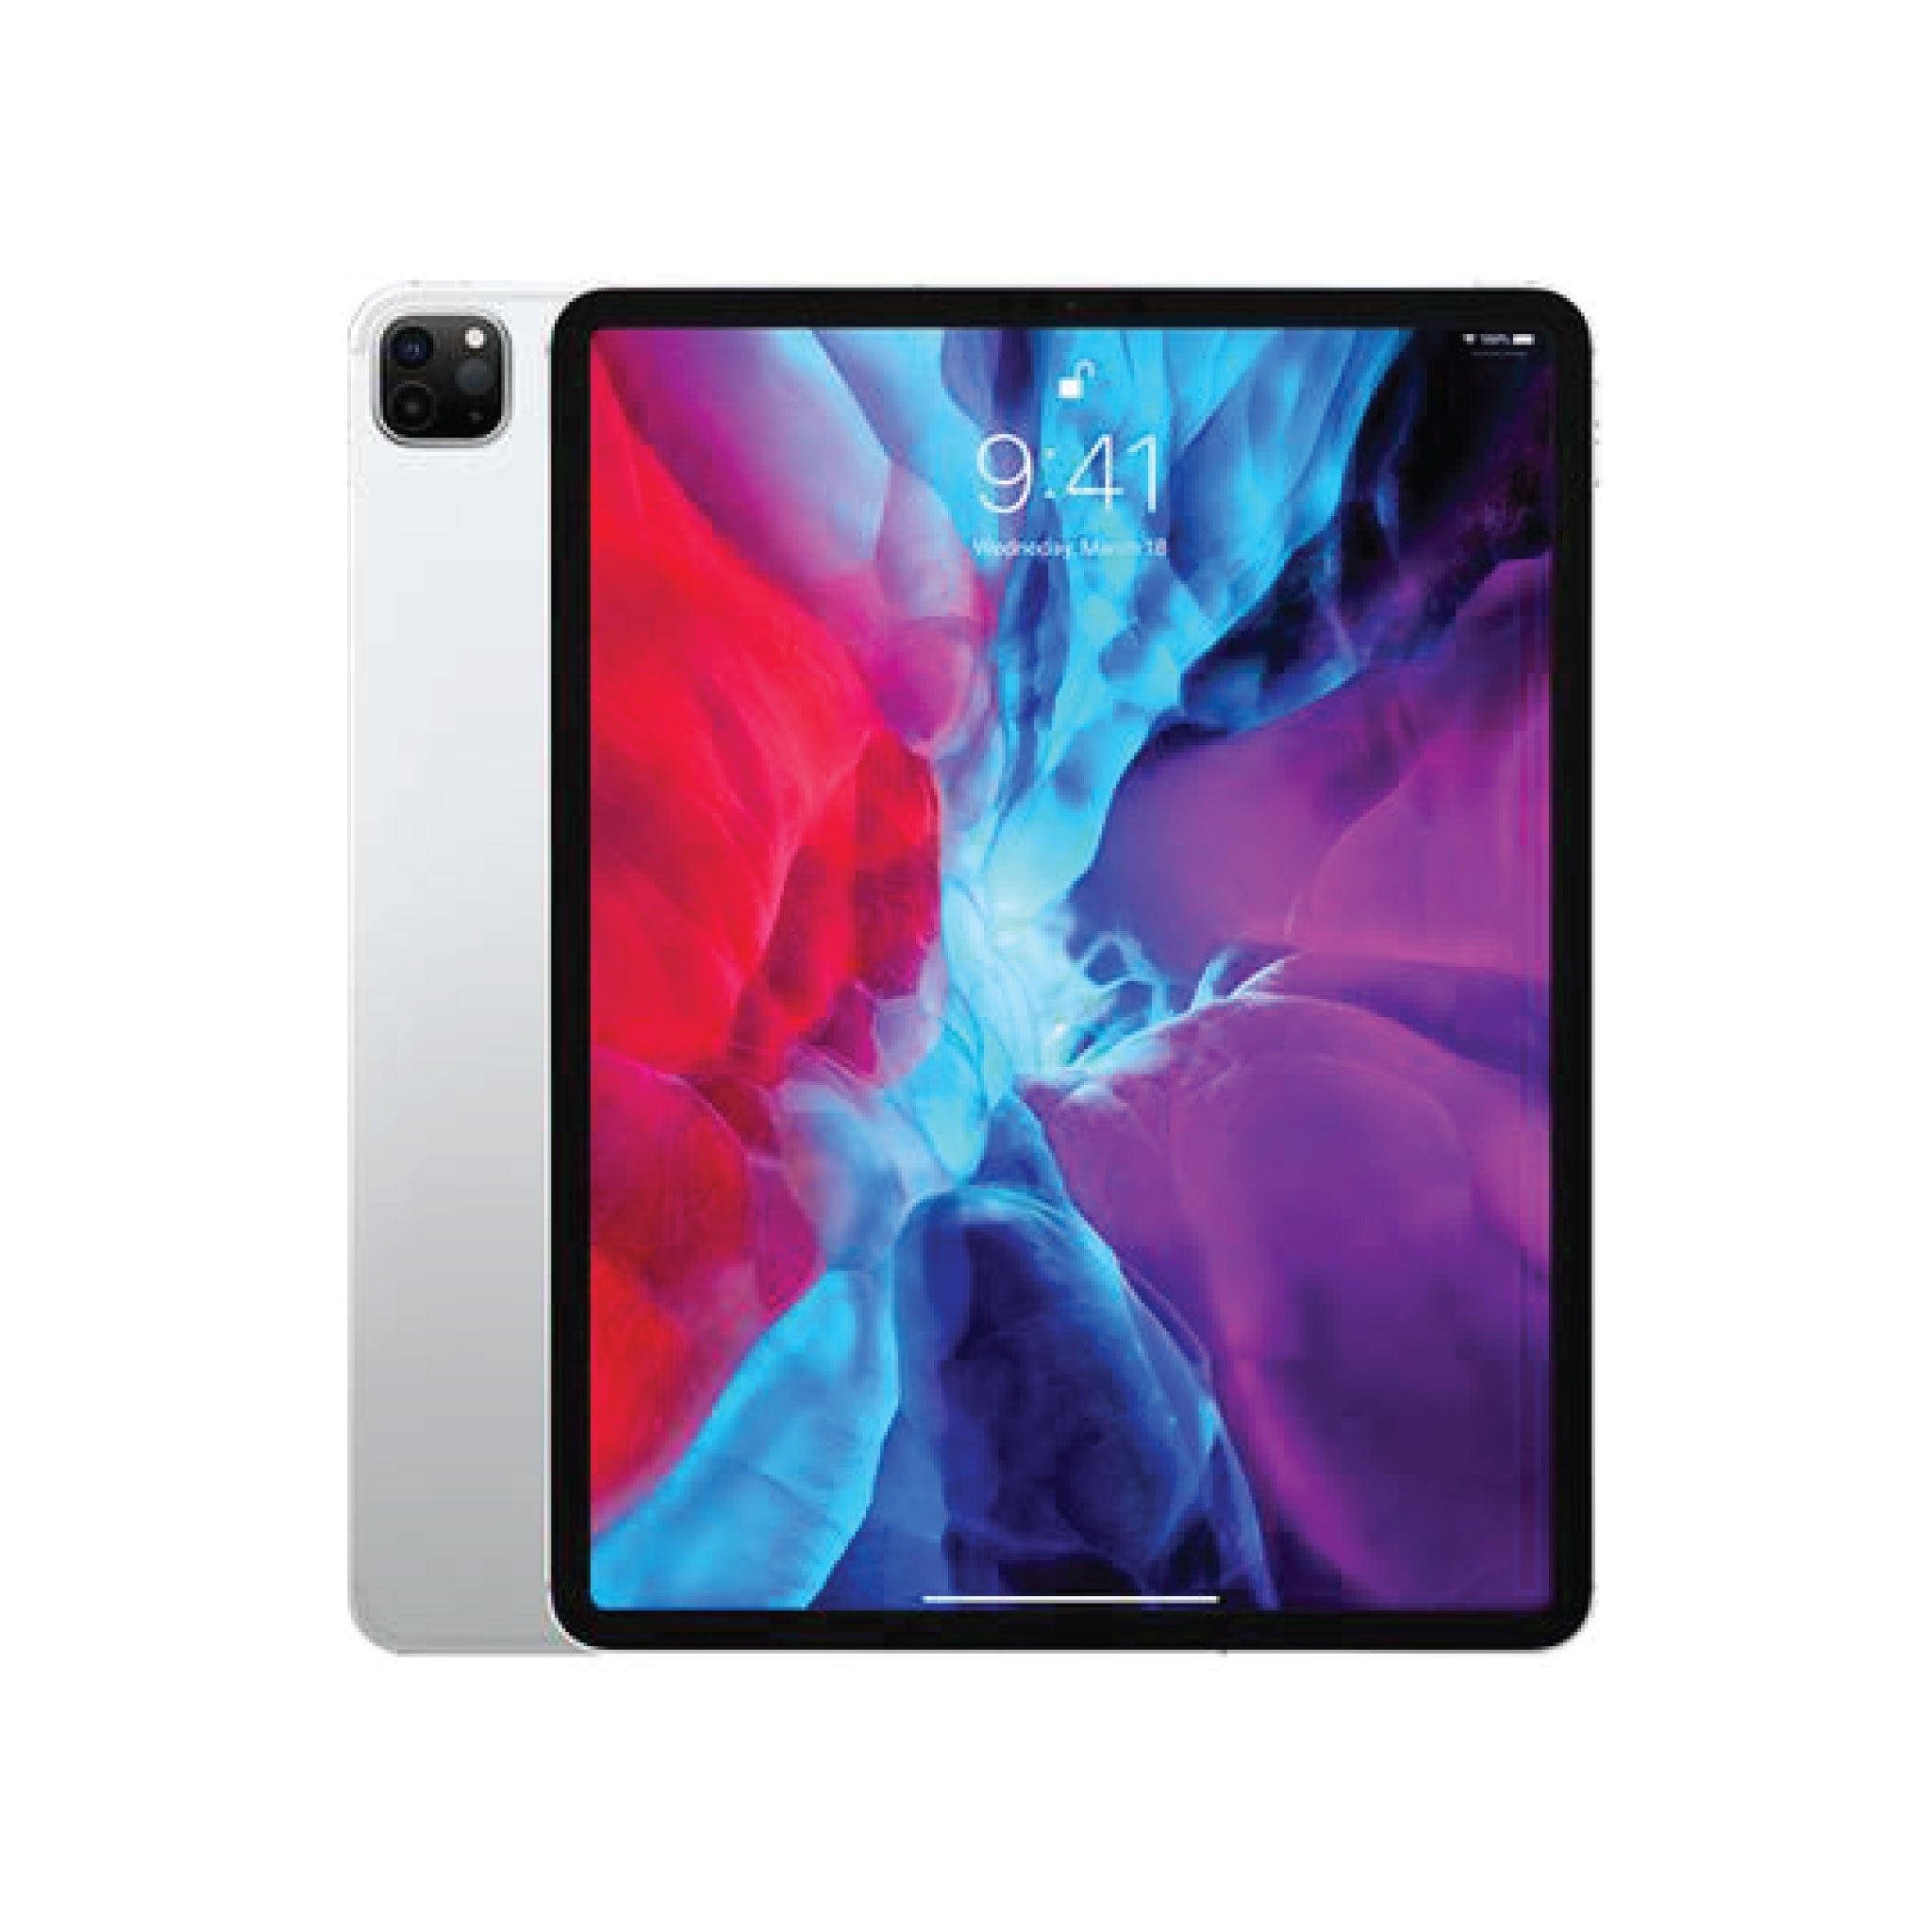  Apple iPad Pro 11-inch (4th Generation): with M2 chip